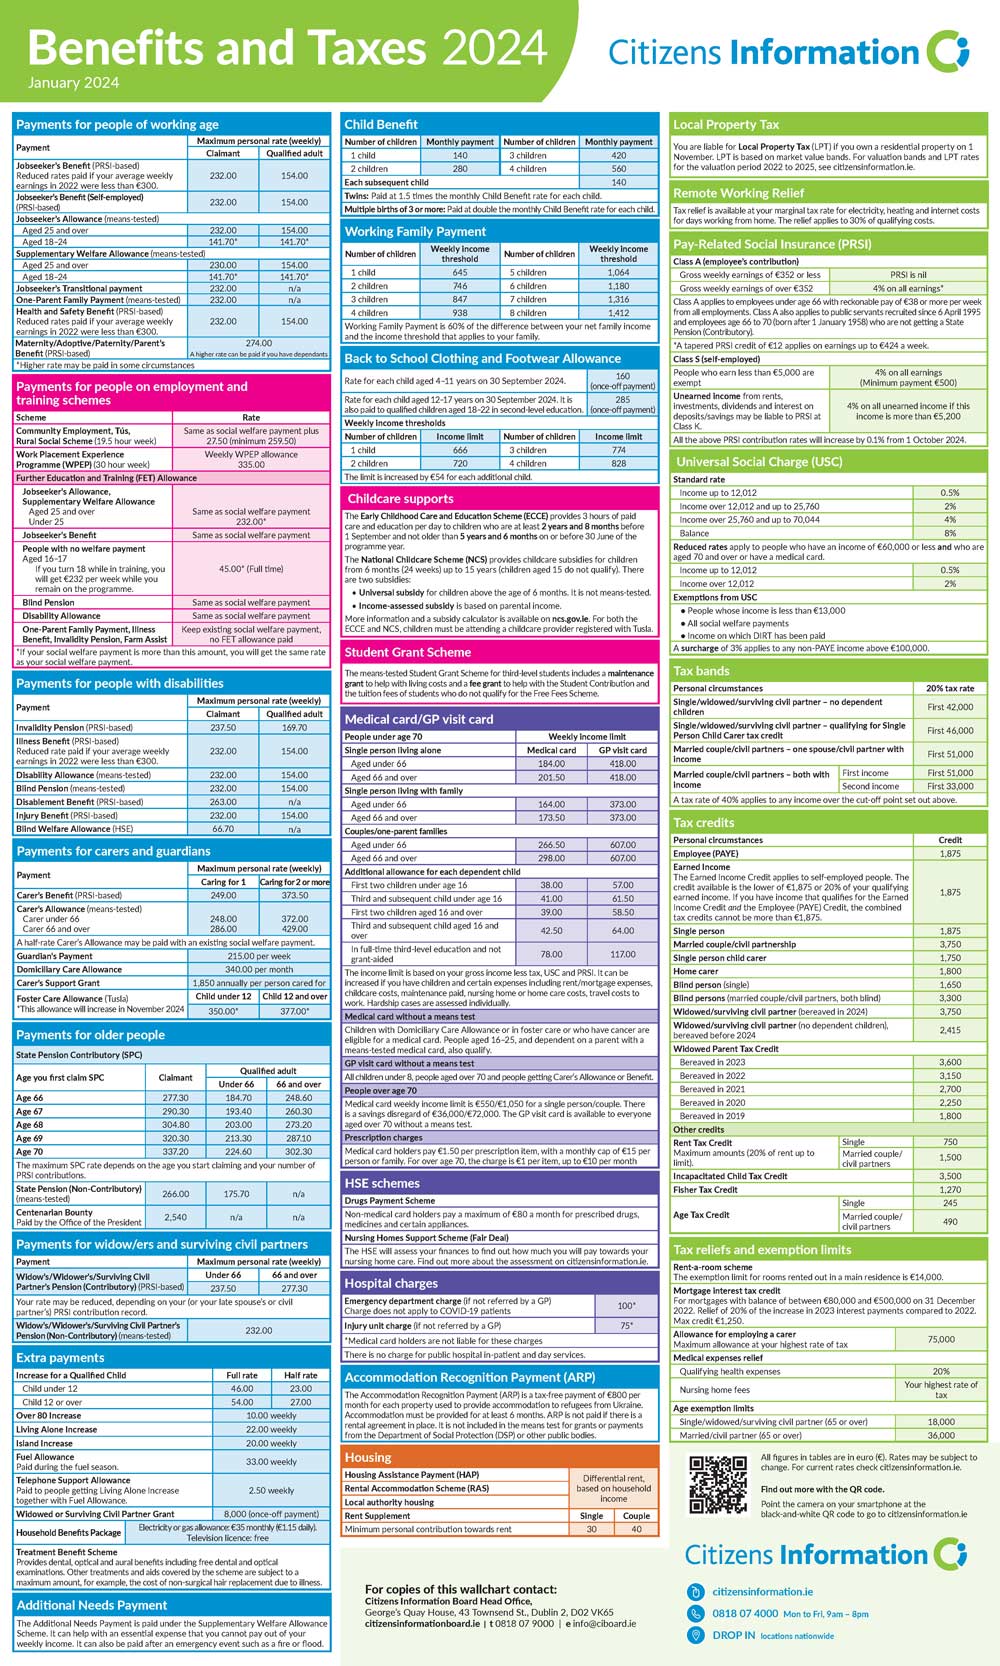 Cover of Benefits and Taxes 2024 wallchart